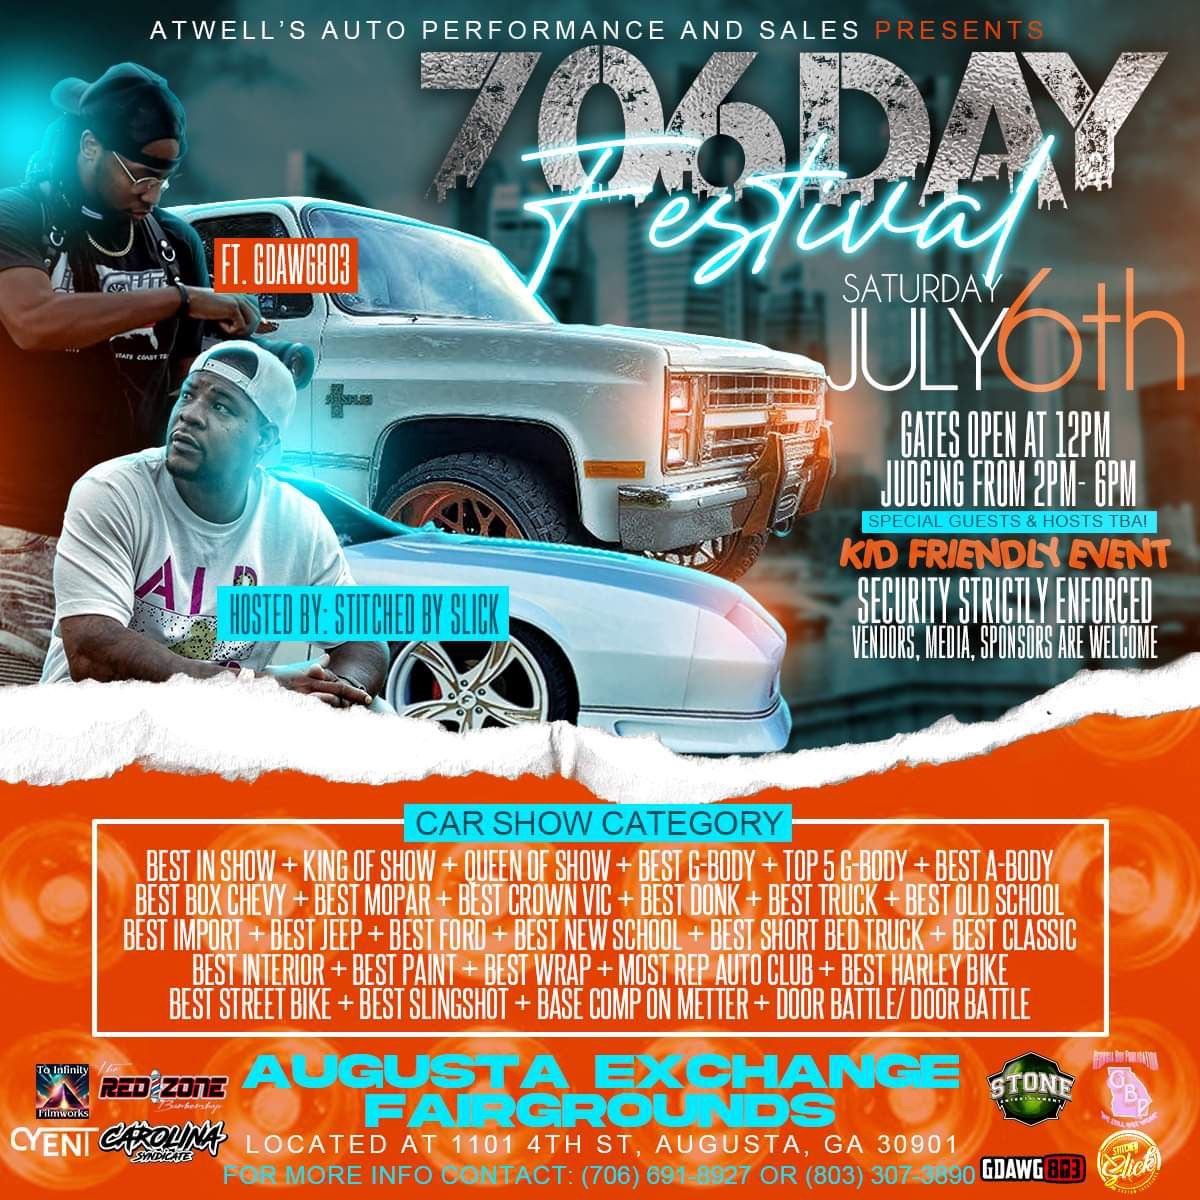 706 DAY Car Show with GDAWG803